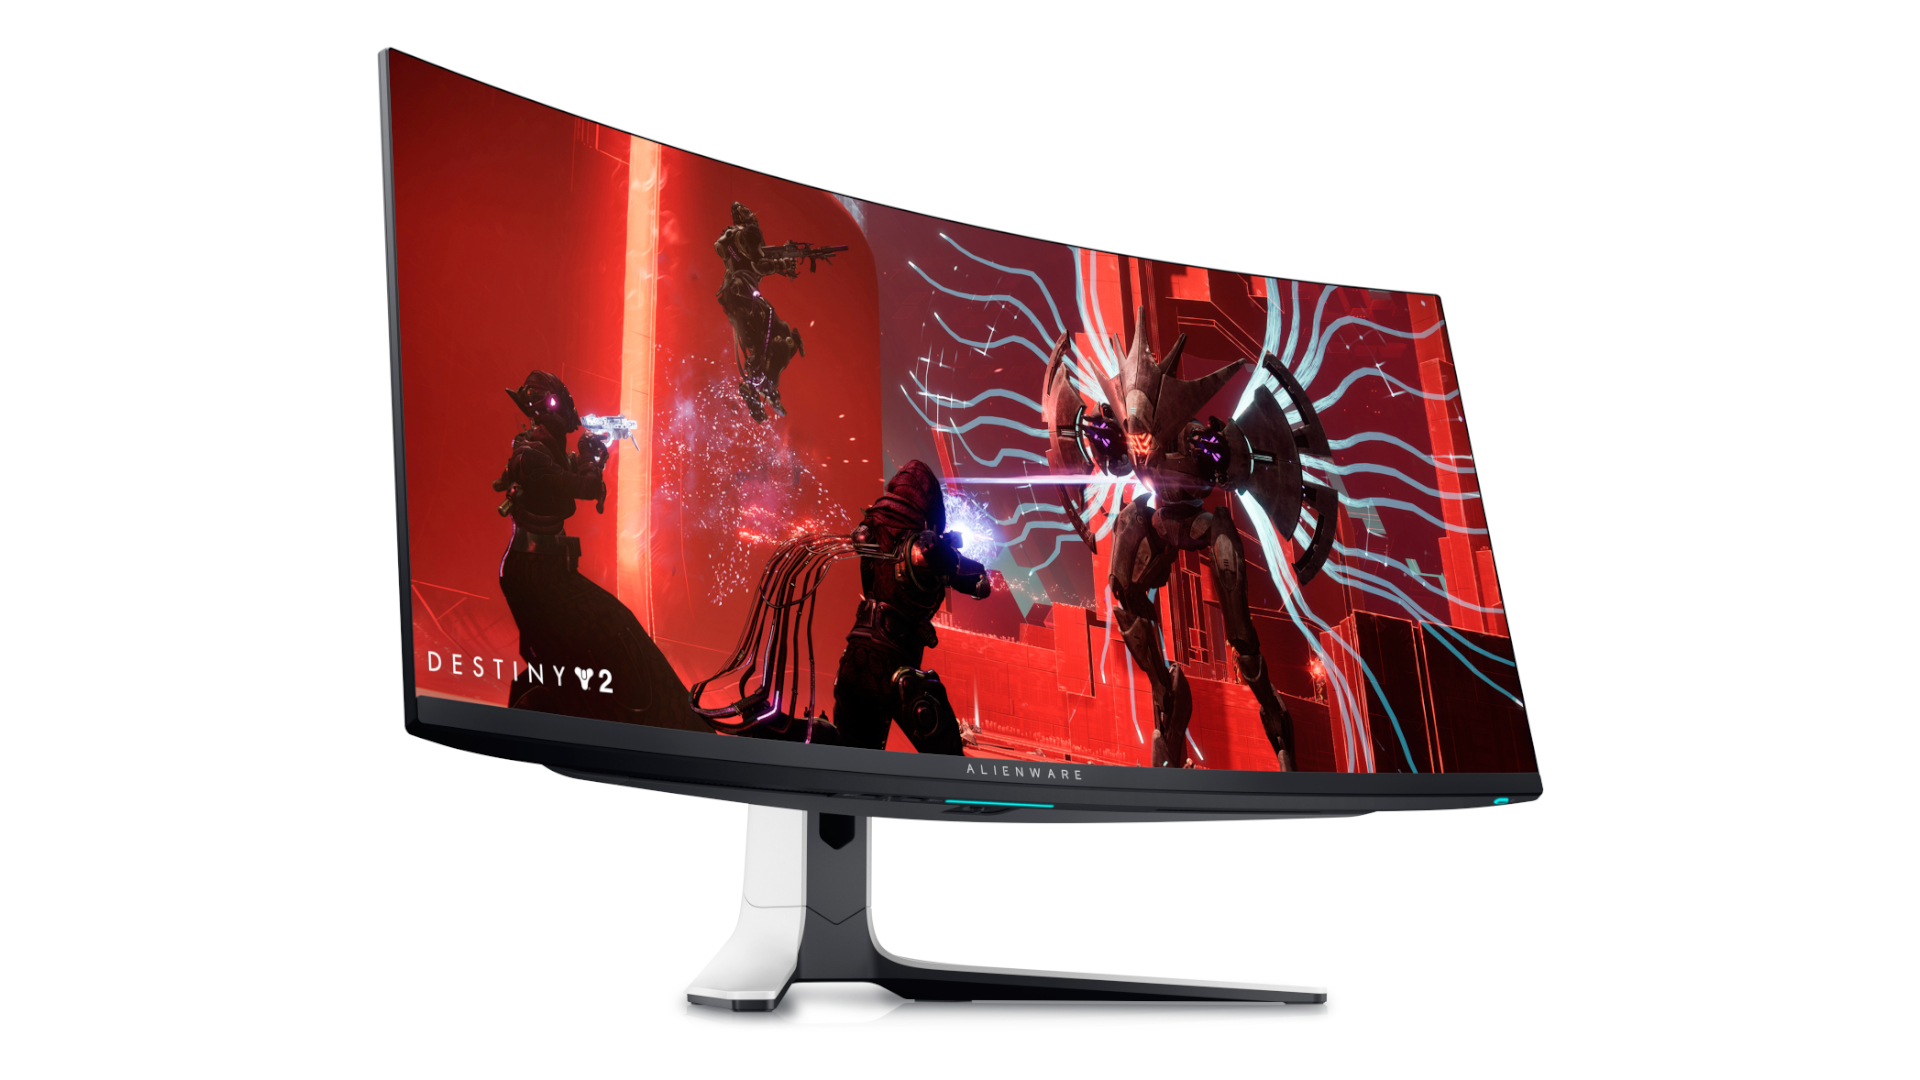 The best HDR monitor is the Alienware AW3423DW.